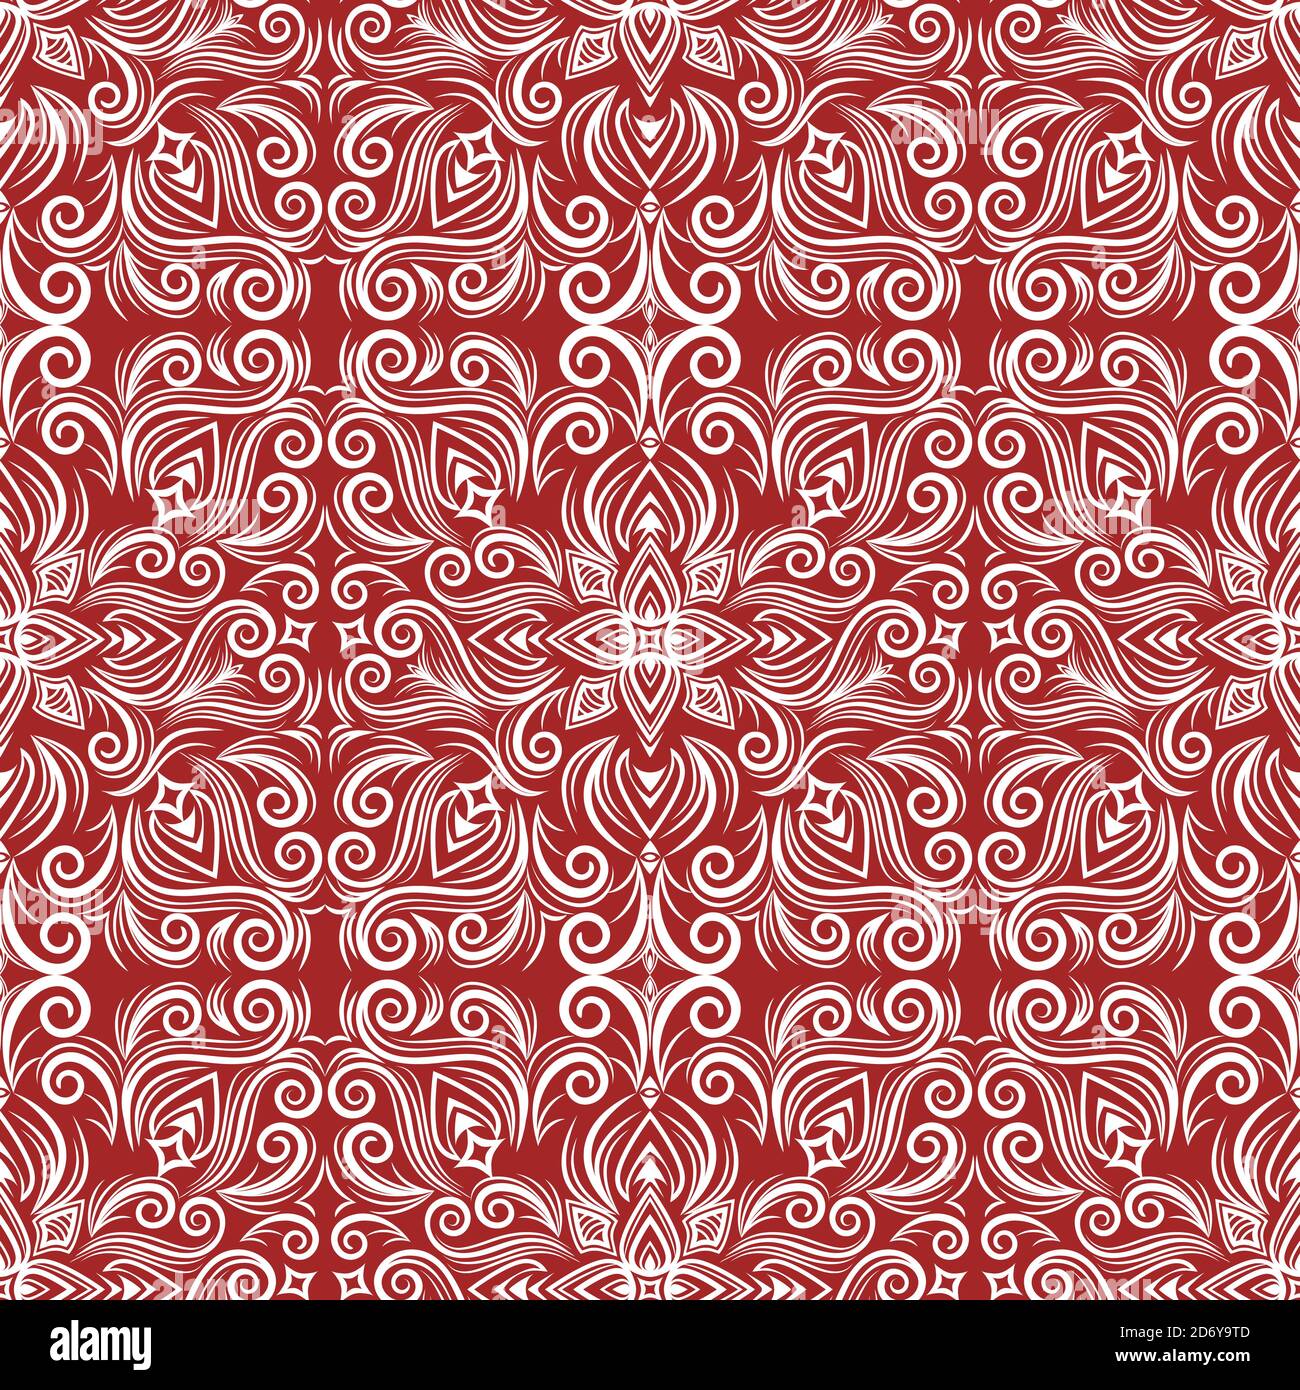 Vector abstract ornament, curve swirls seamless pattern with flowers and curls, line ethnic drawing. Vintage white traceries on red background, for Stock Vector